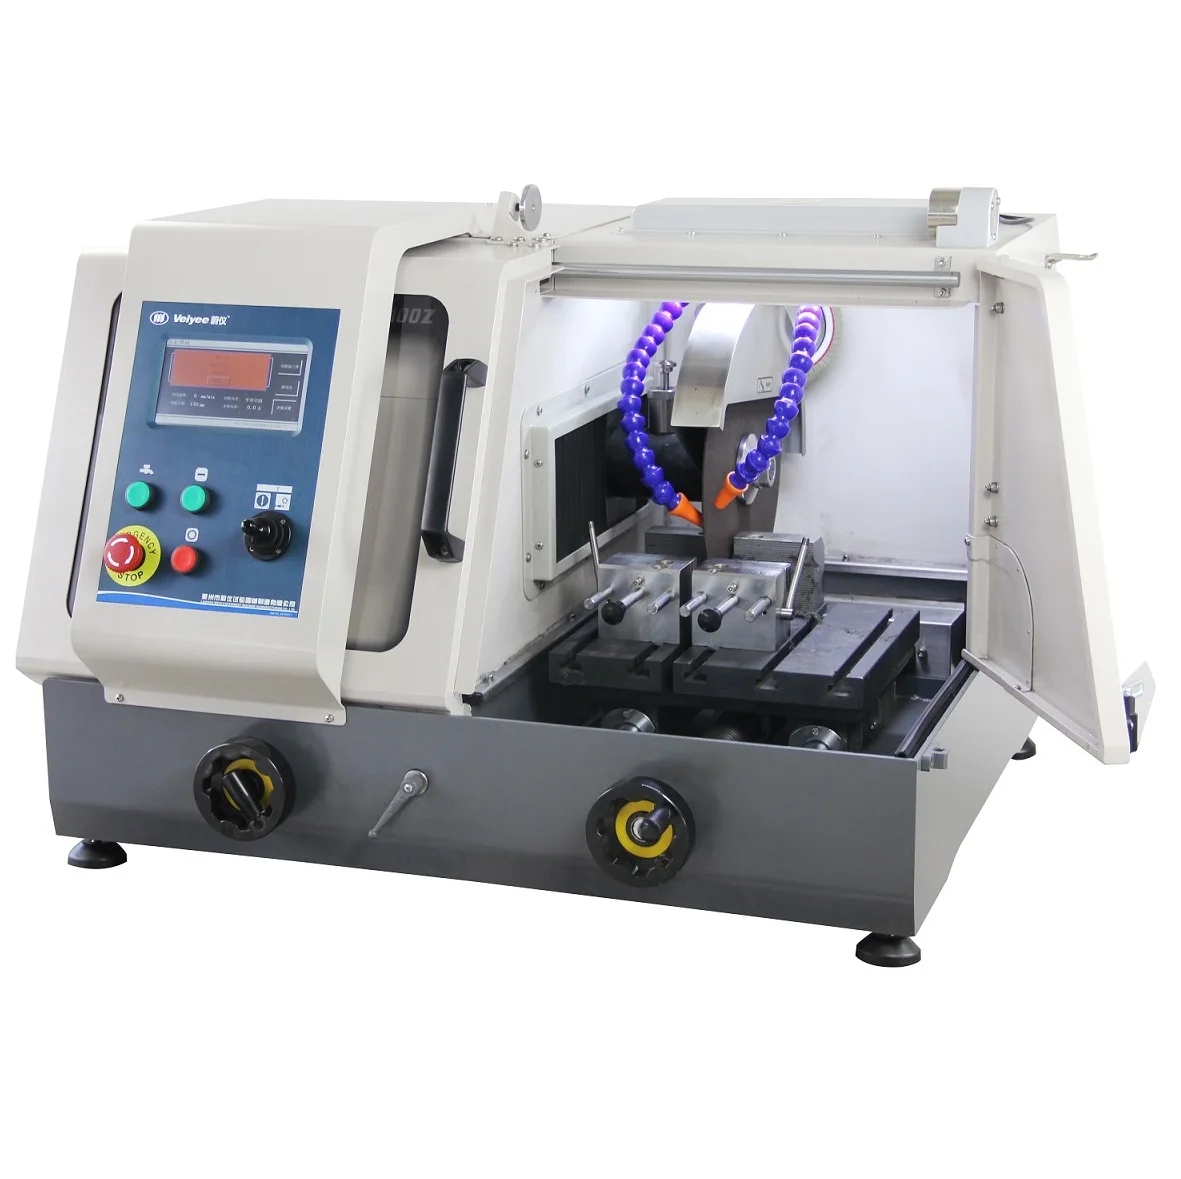 
Q-80Z manual & automatic sample cutter for metal 